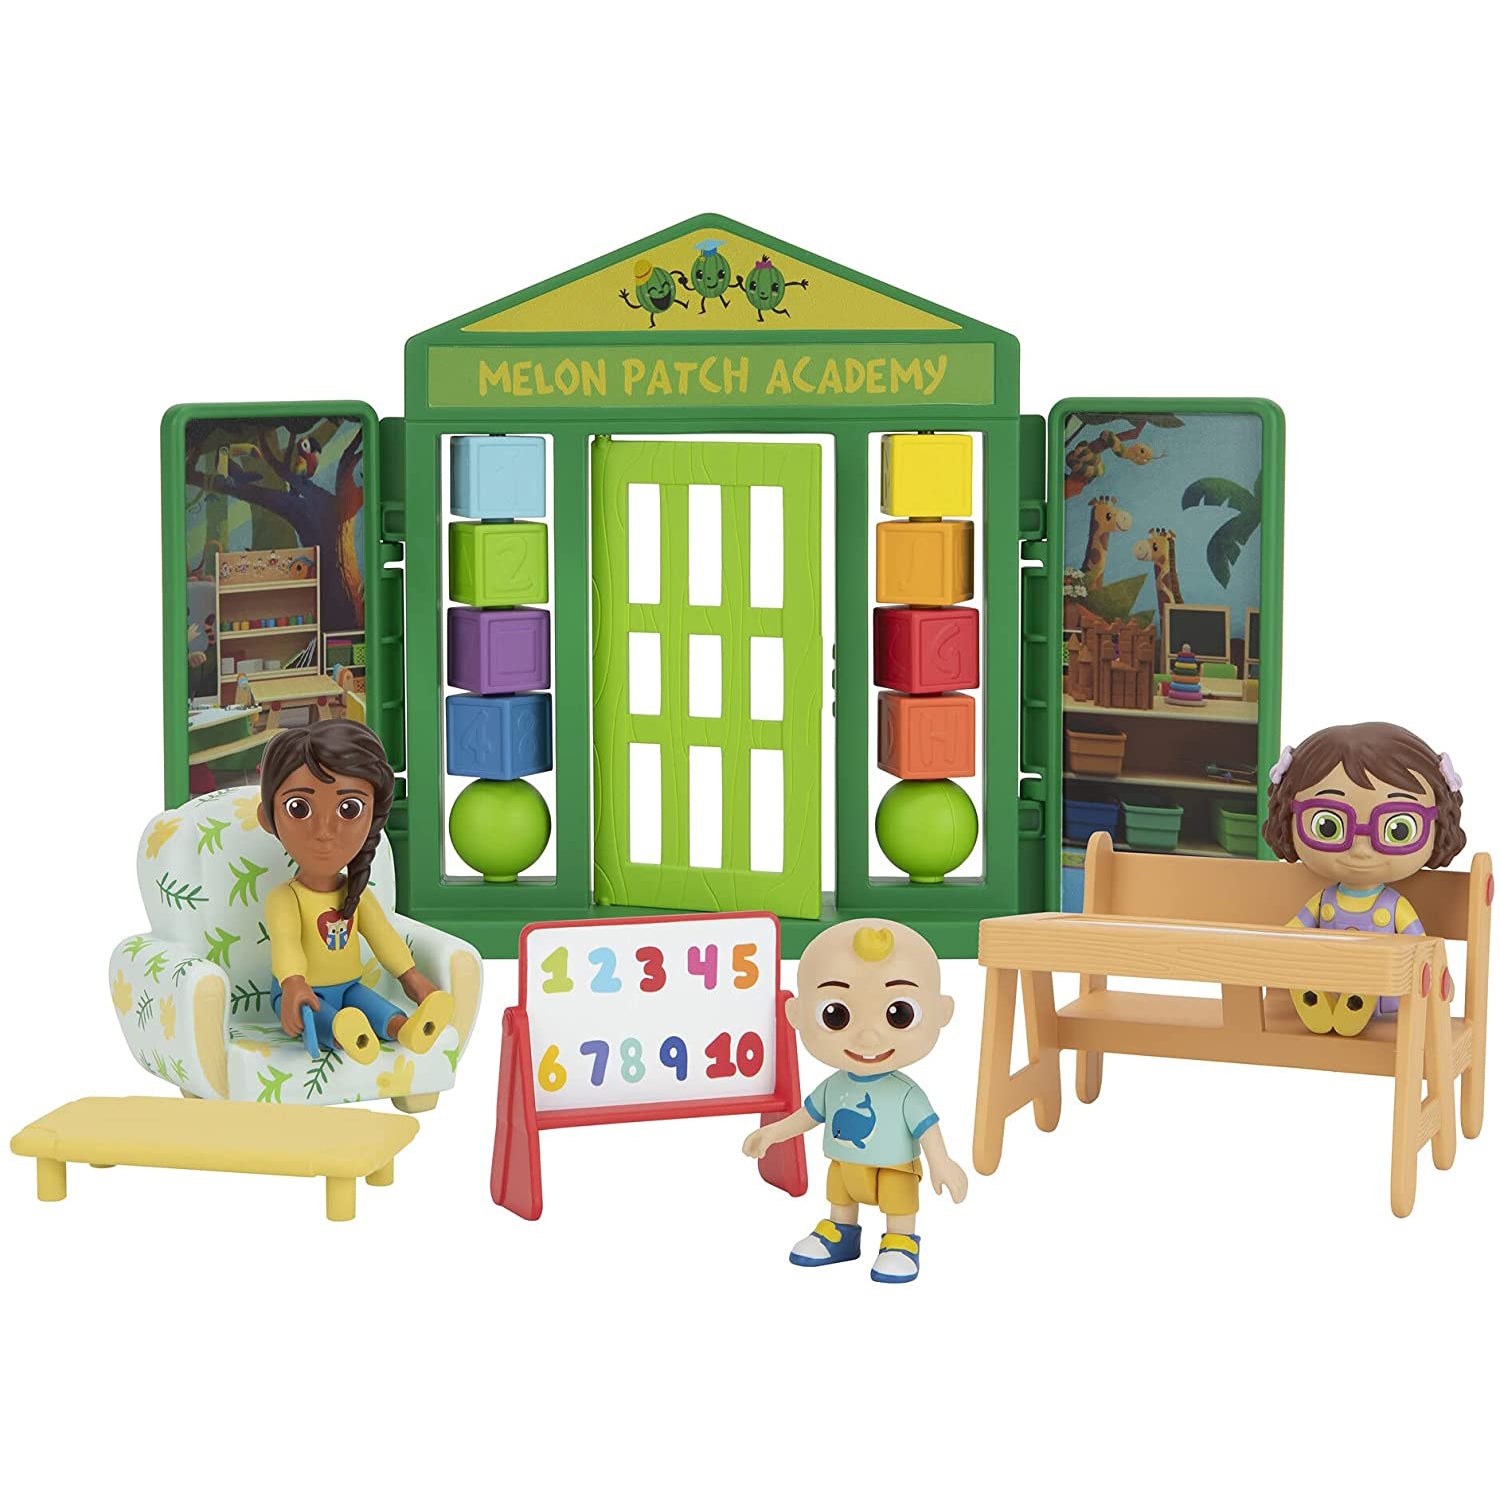 Cocomelon School Time Deluxe Playtime Set